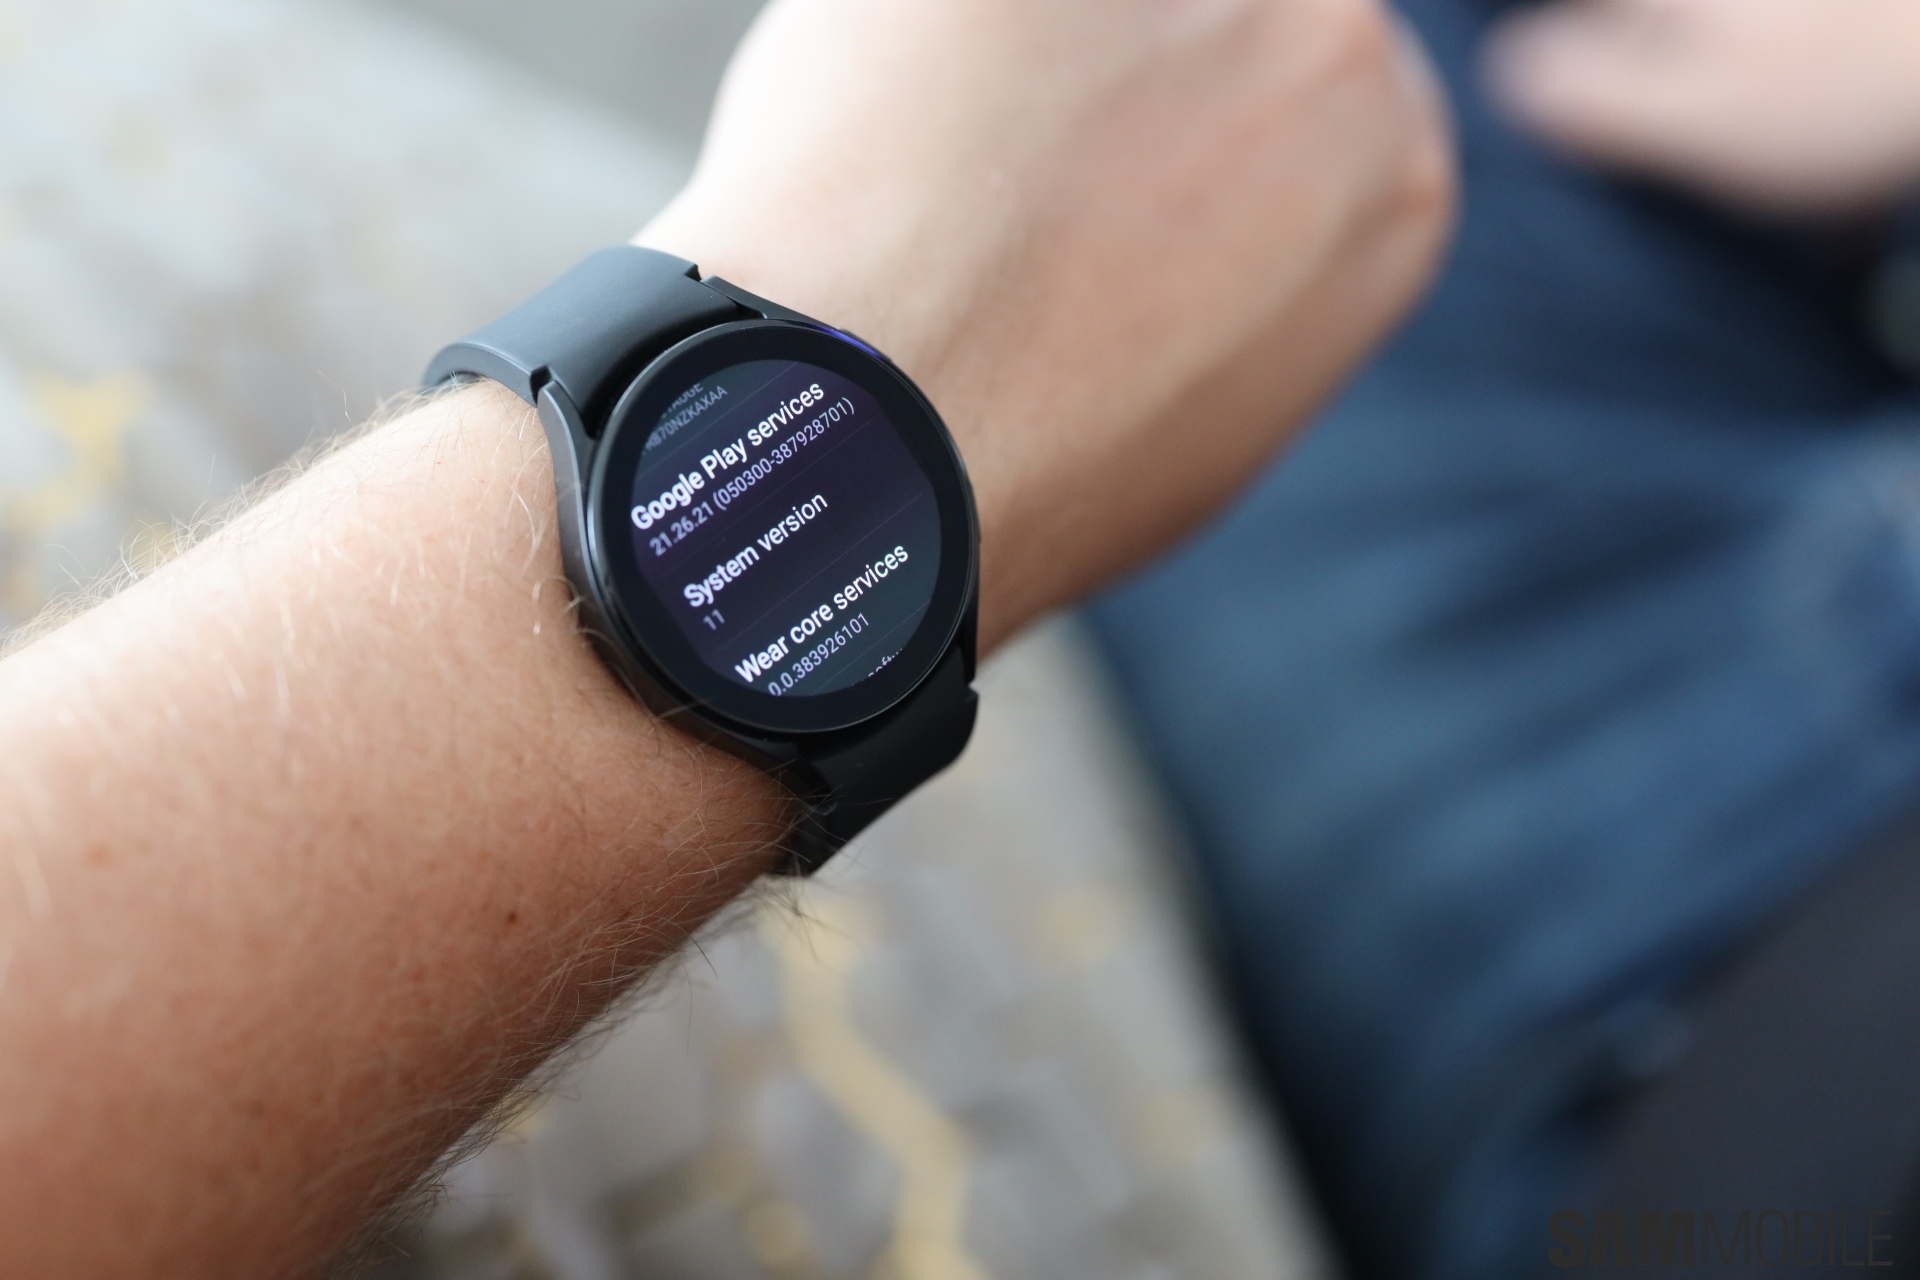 Samsung Galaxy Watch 4 review: The standard for Android smartwatches